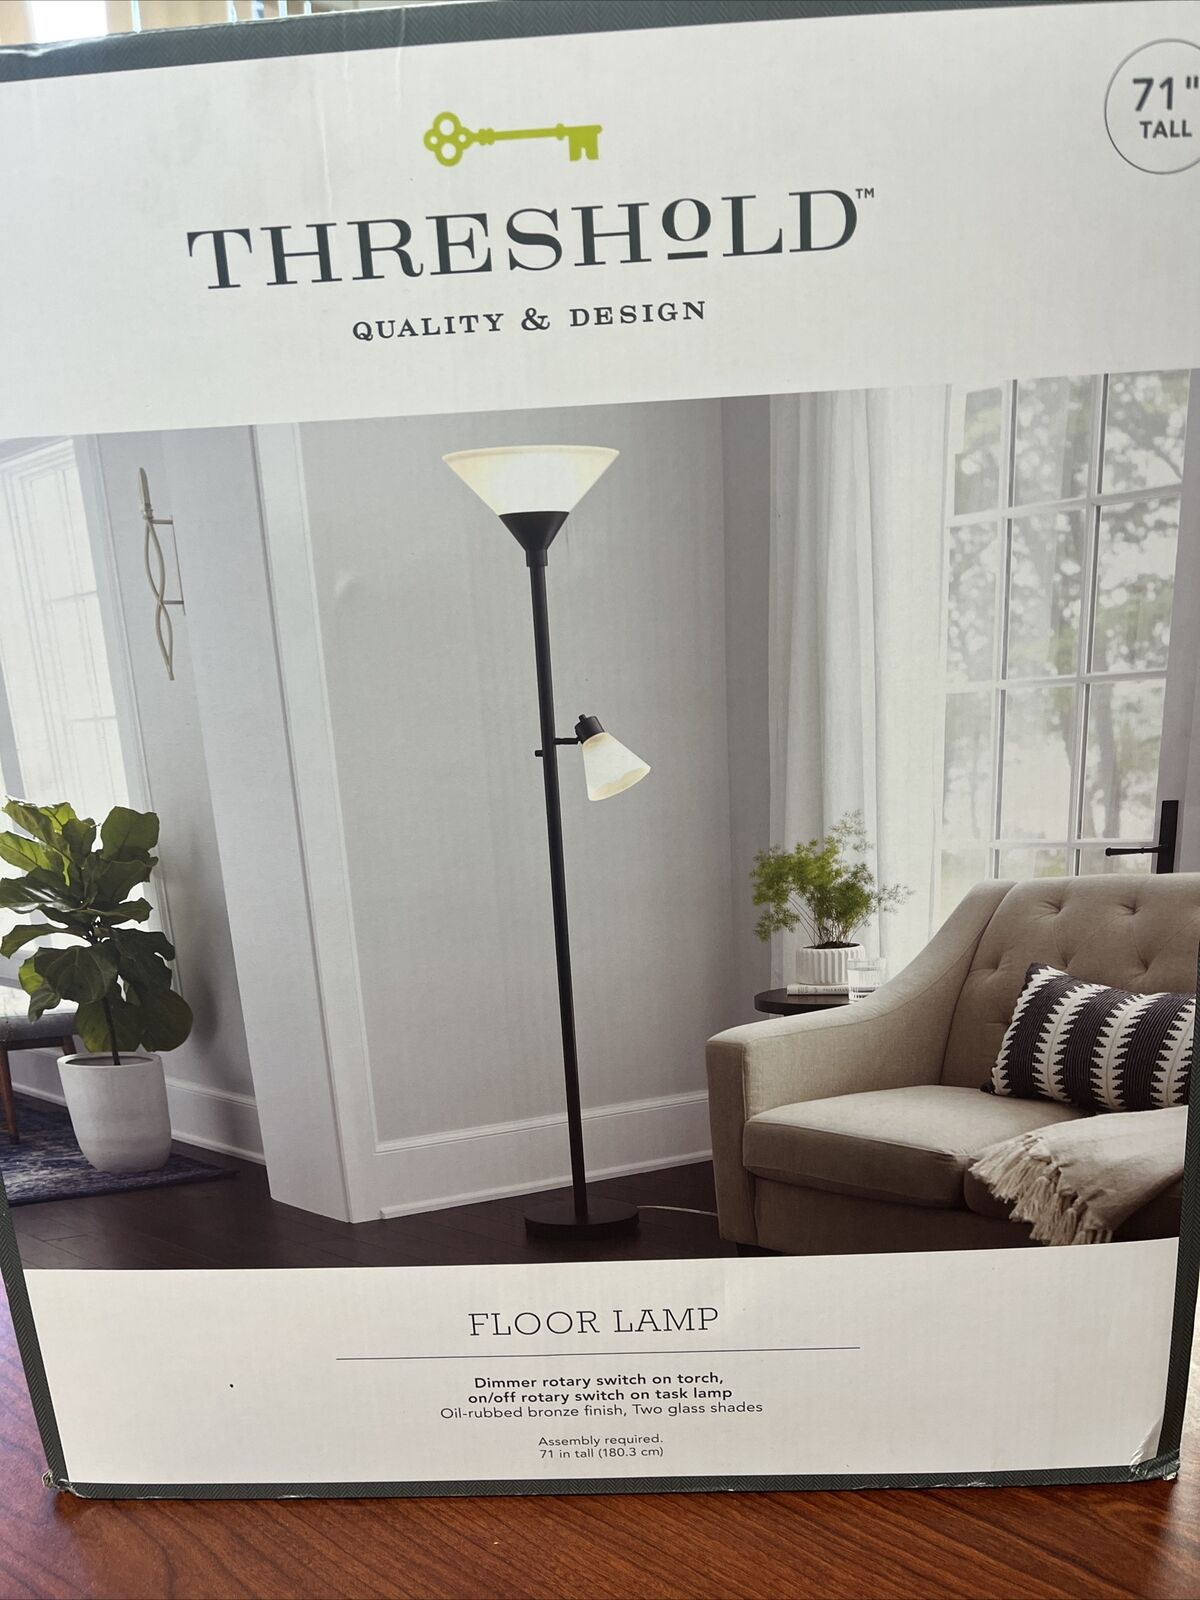 Threshold Quality & Design Floor Lamp Assembly Required 71 in tall(180.3 cm)